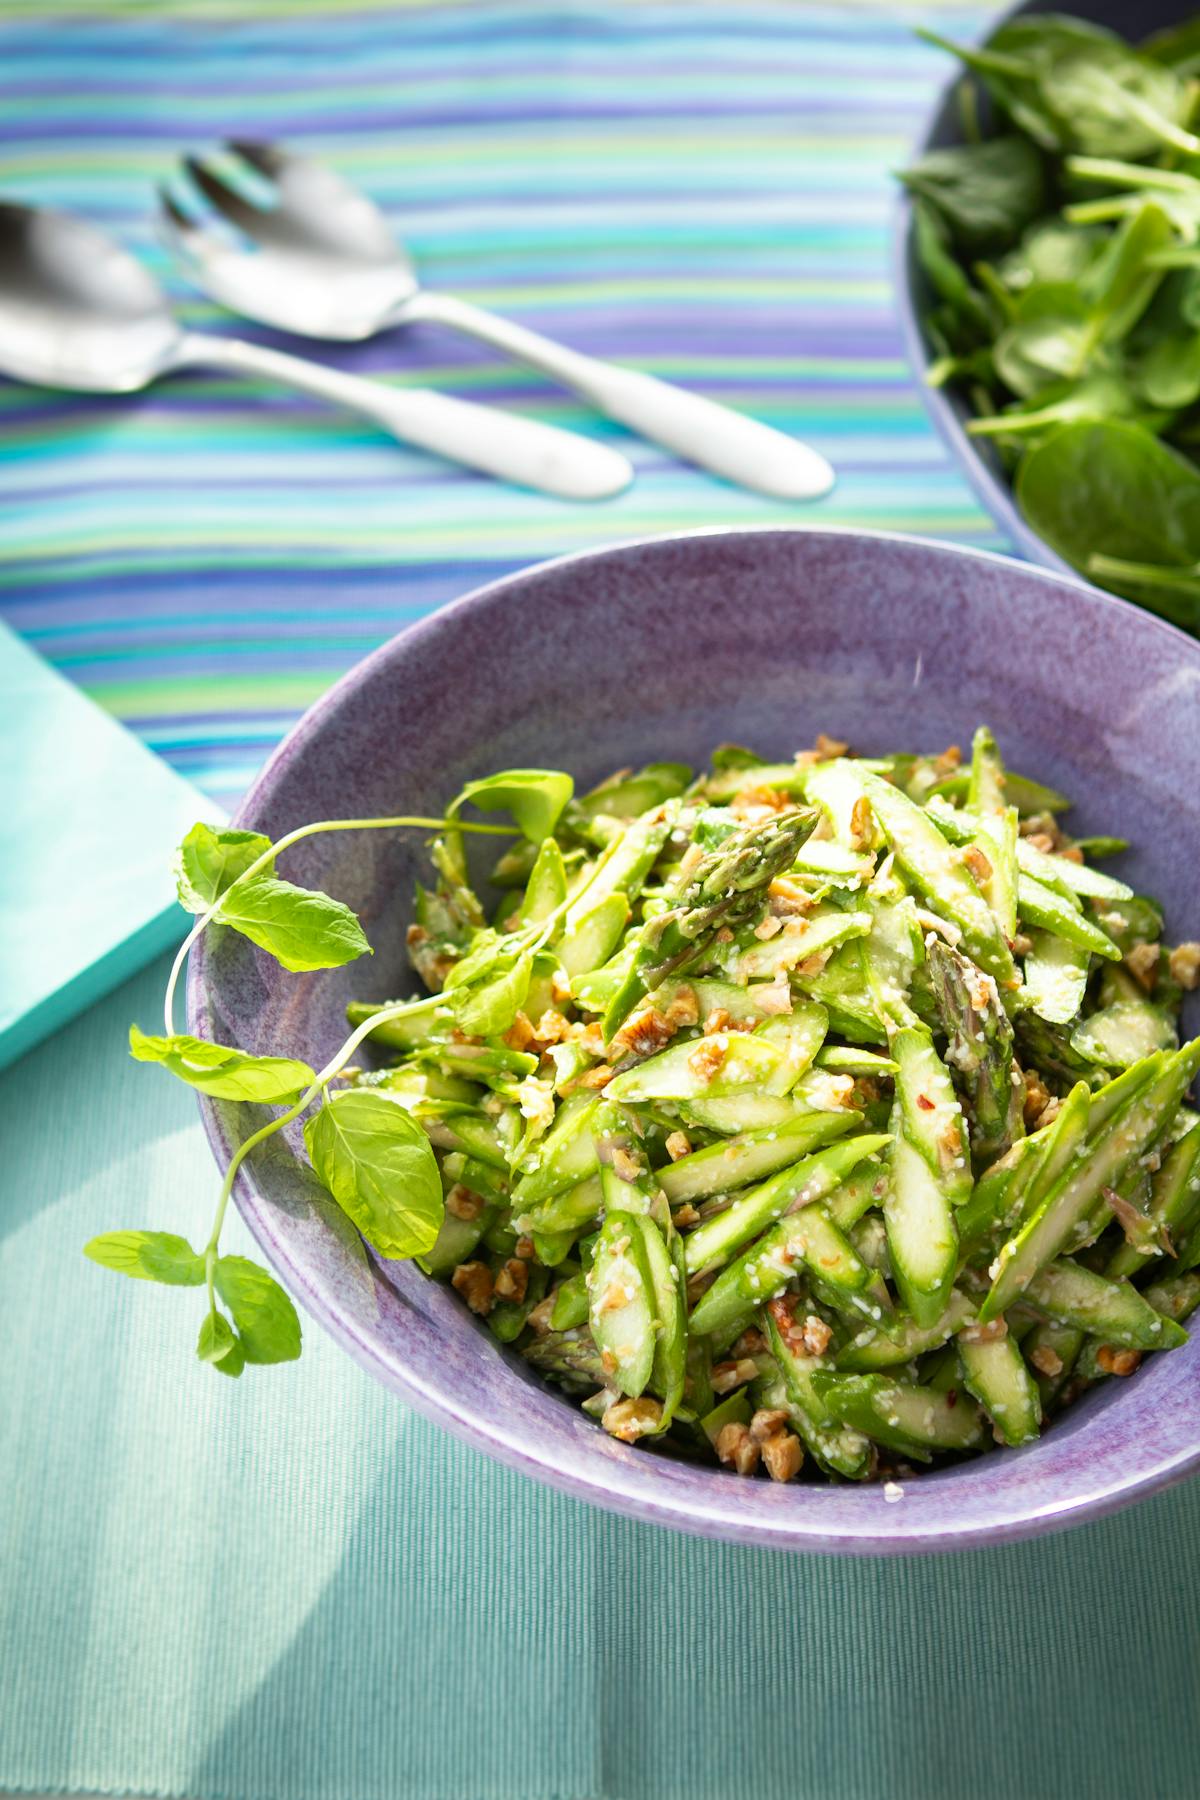 Low carb asparagus salad with walnuts